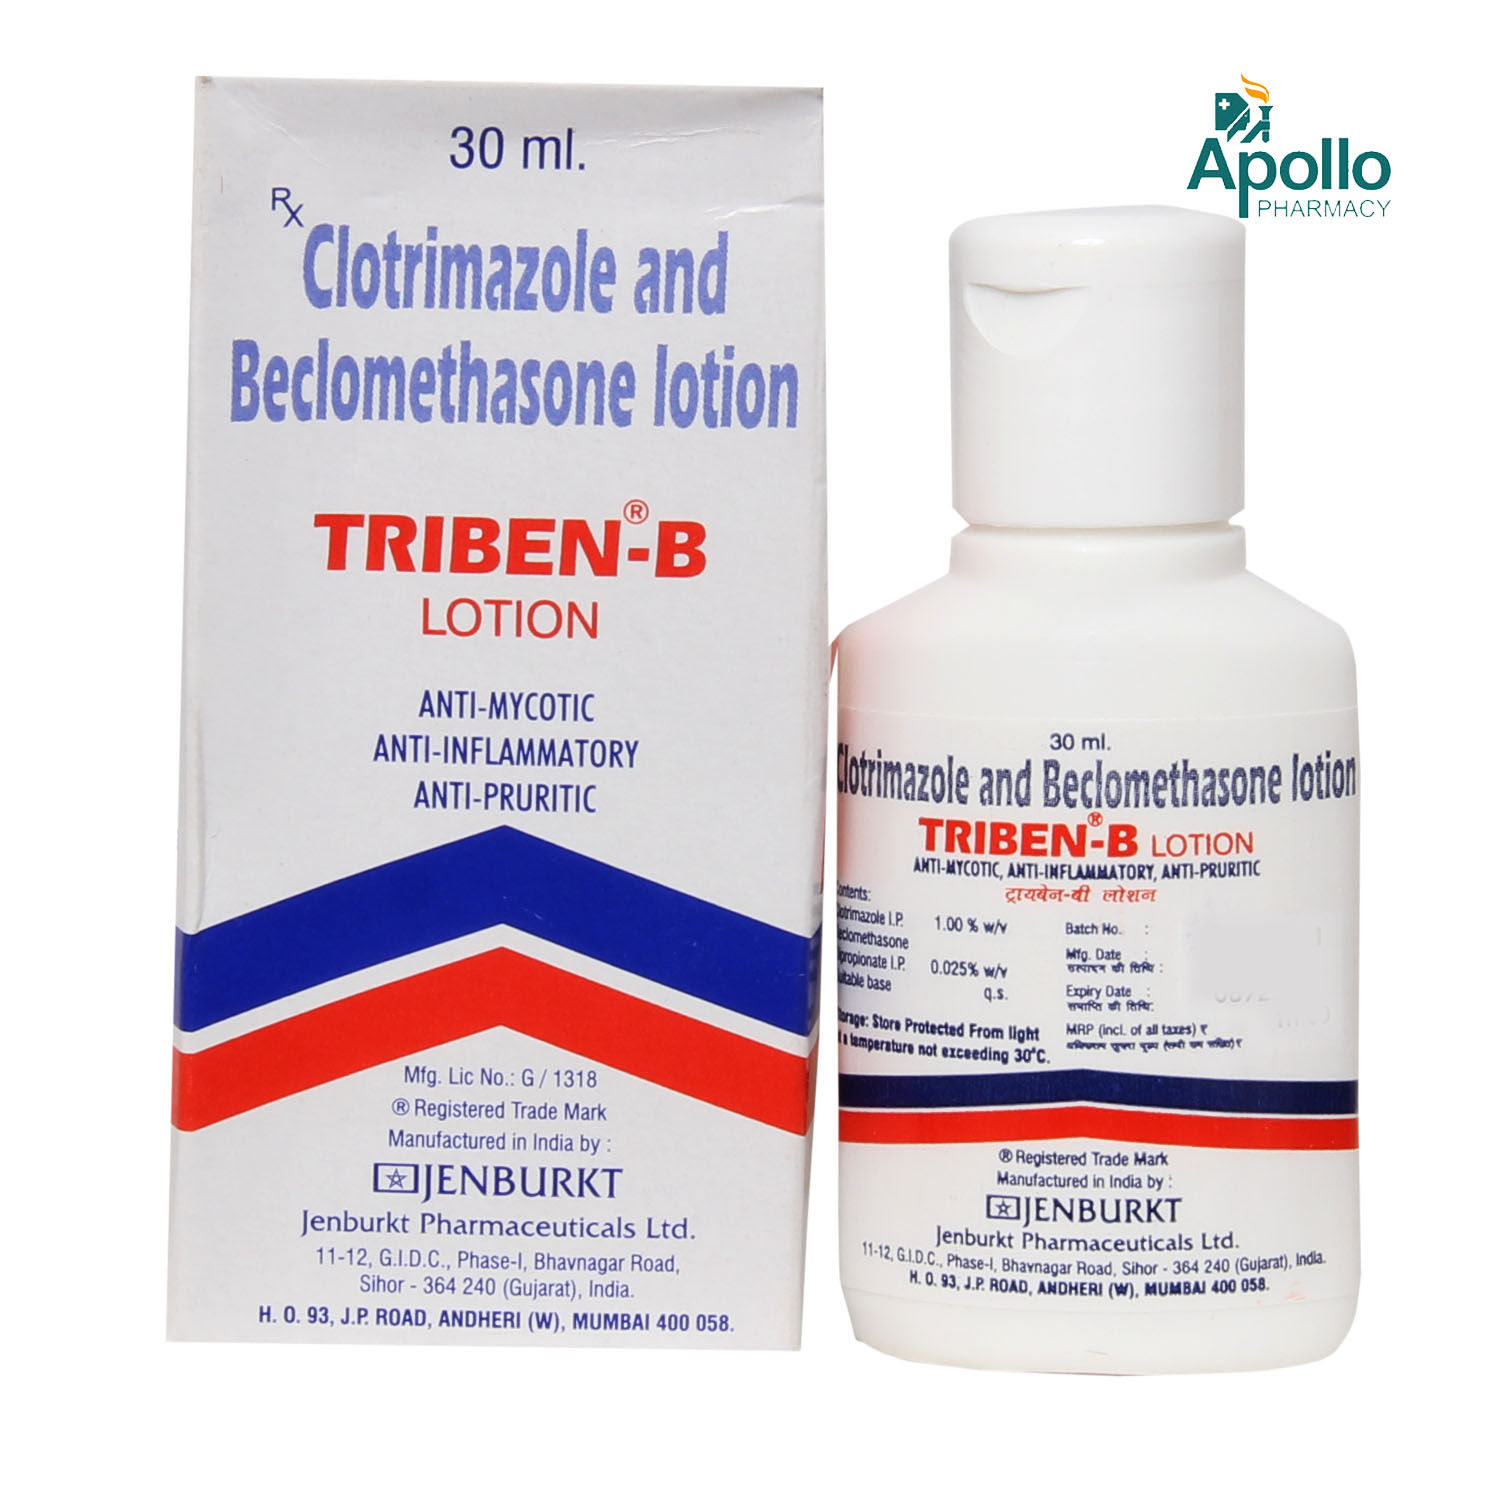 Triben-B Lotion 30 ml Price, Uses, Side Effects, Composition - Apollo  Pharmacy